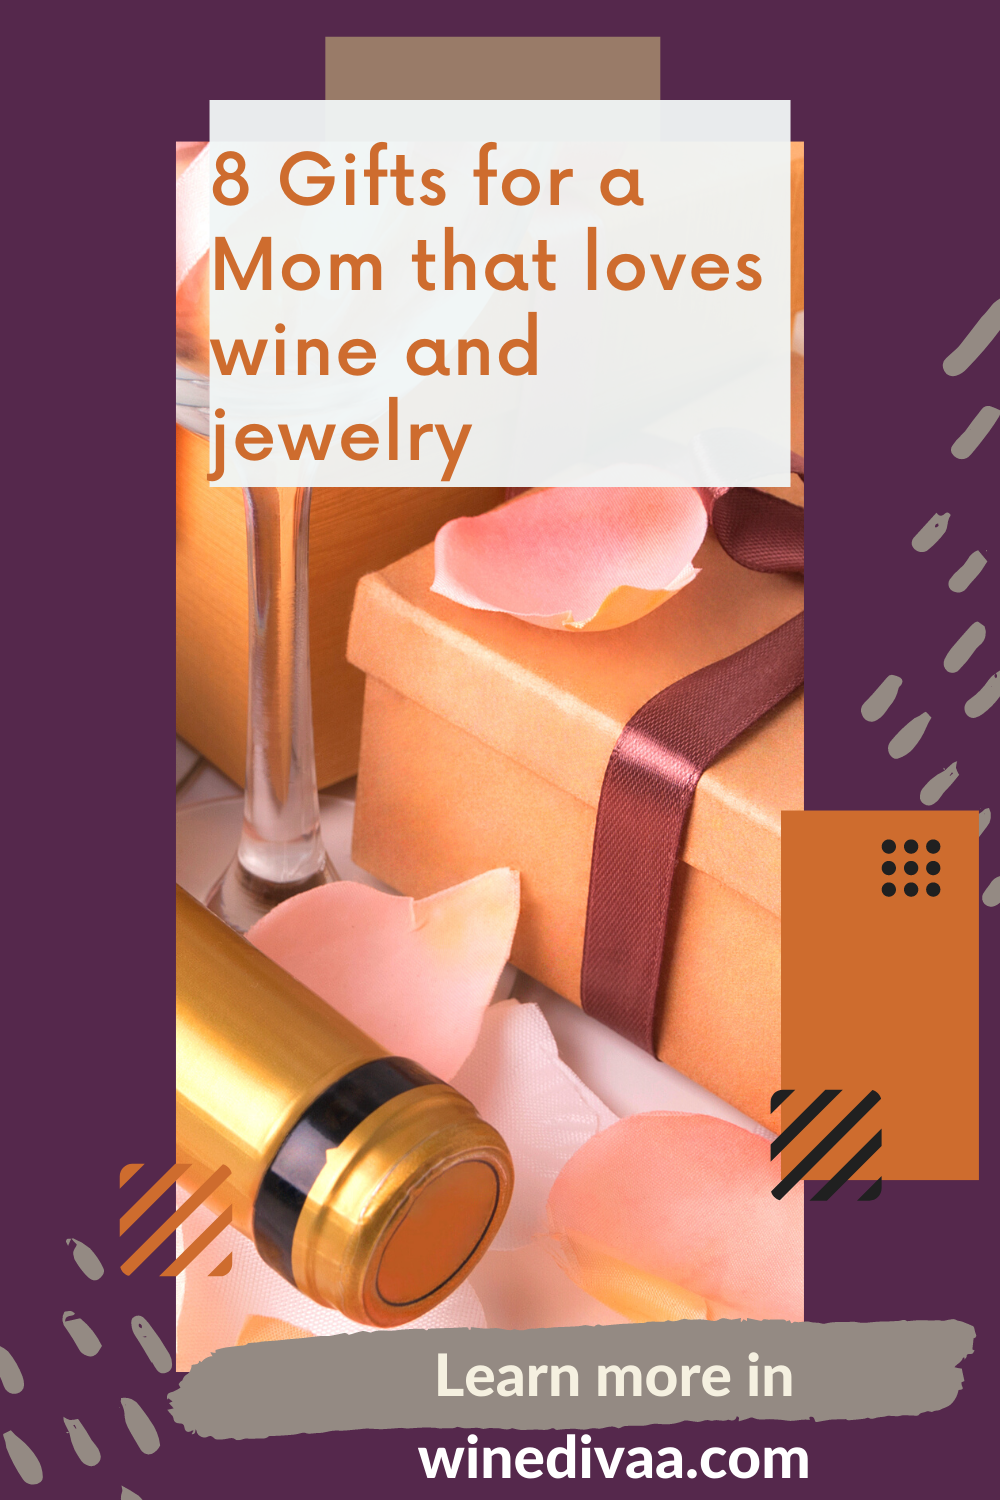 8 Gifts for a Mom that loves Wines and Jewelry